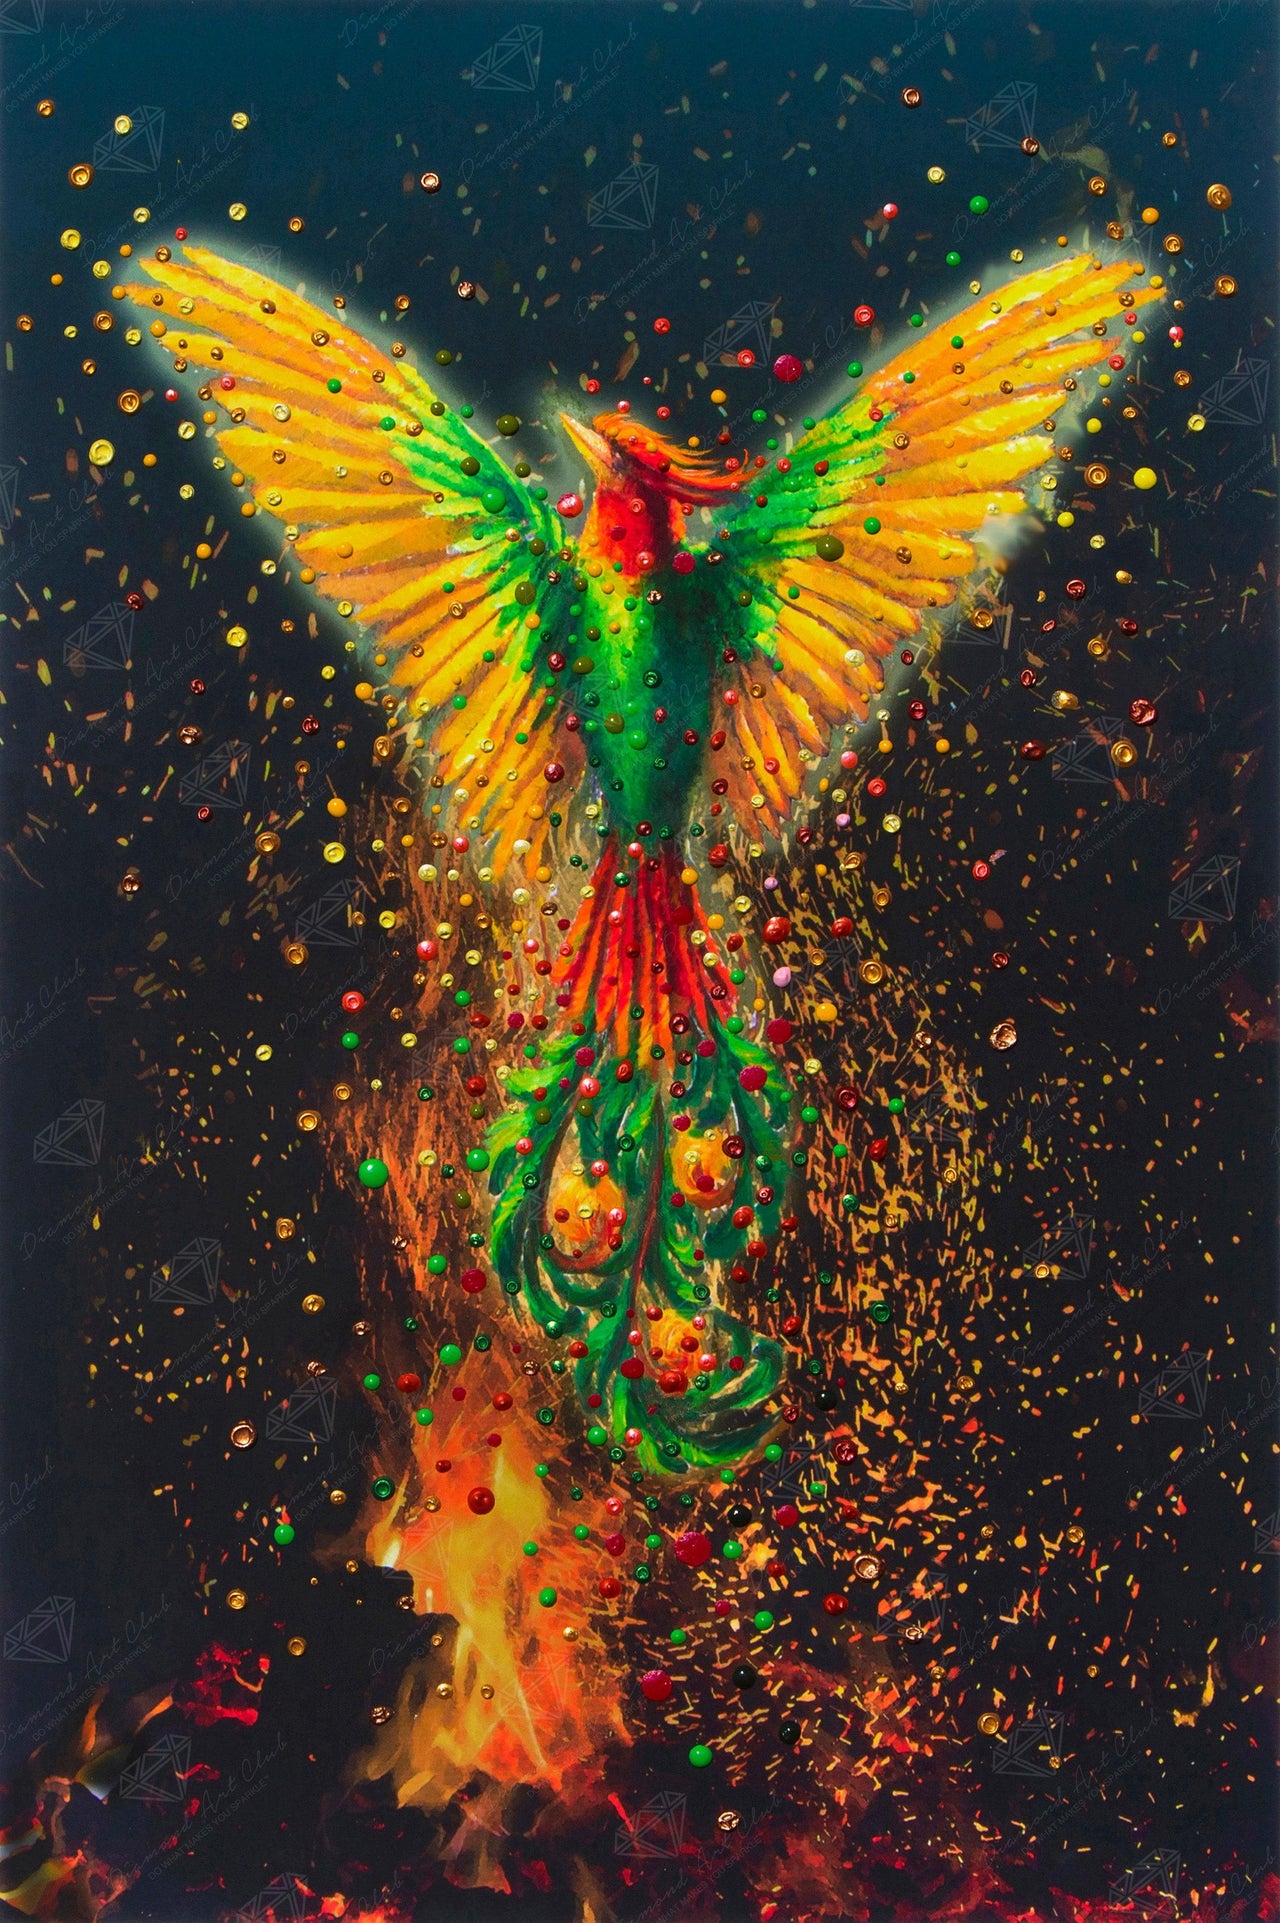 Diamond Painting Phoenix Rising 22" x 33" (55.9cm x 83.8cm) / Round with 42 Colors including 4 ABs / 59,501